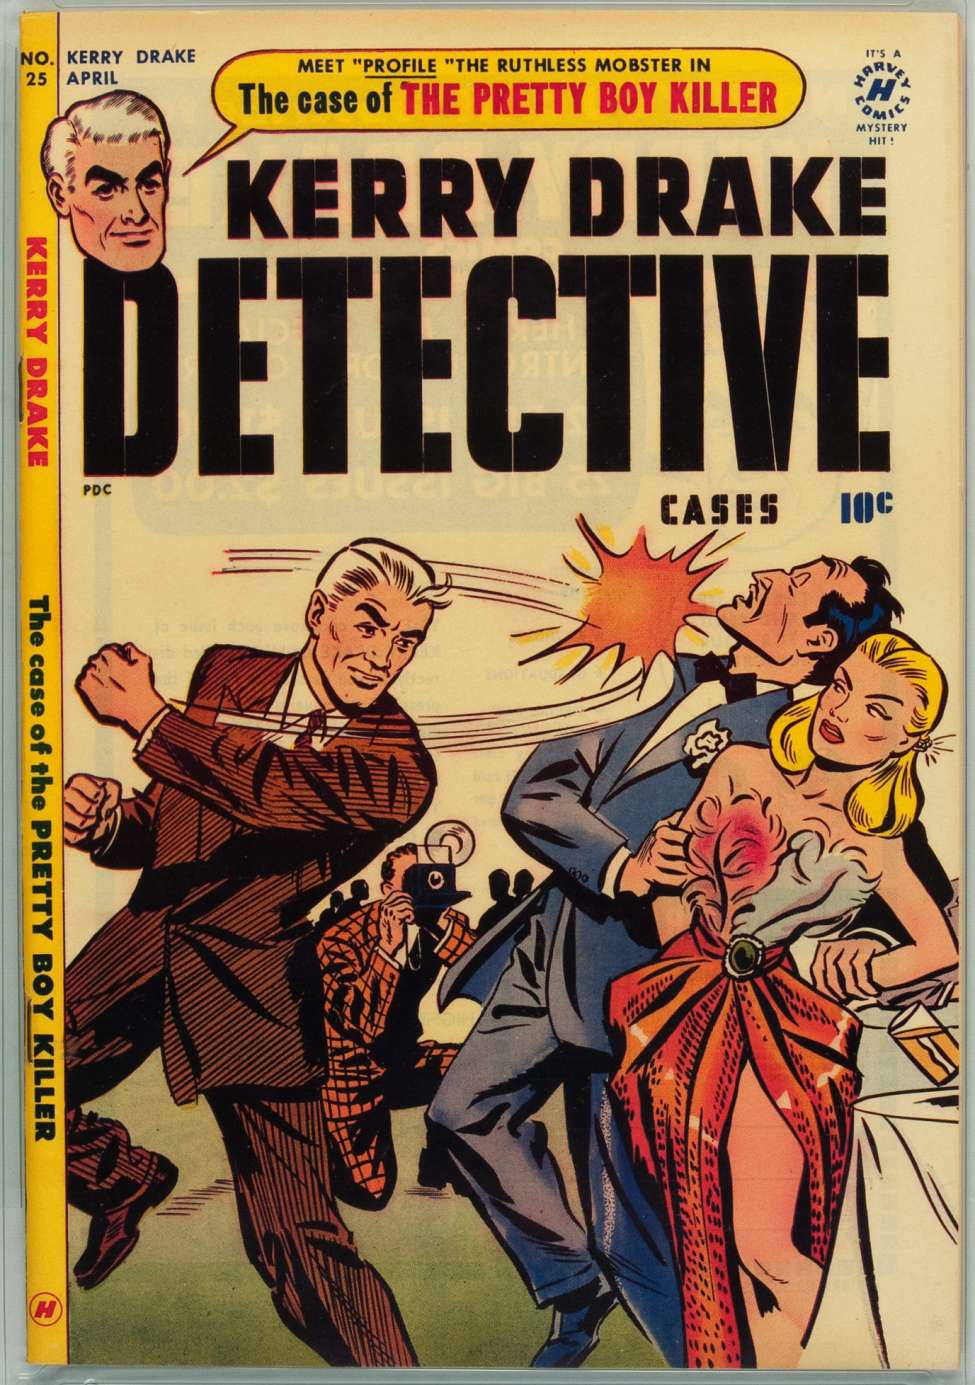 Comic Book Cover For Kerry Drake Detective Cases 25